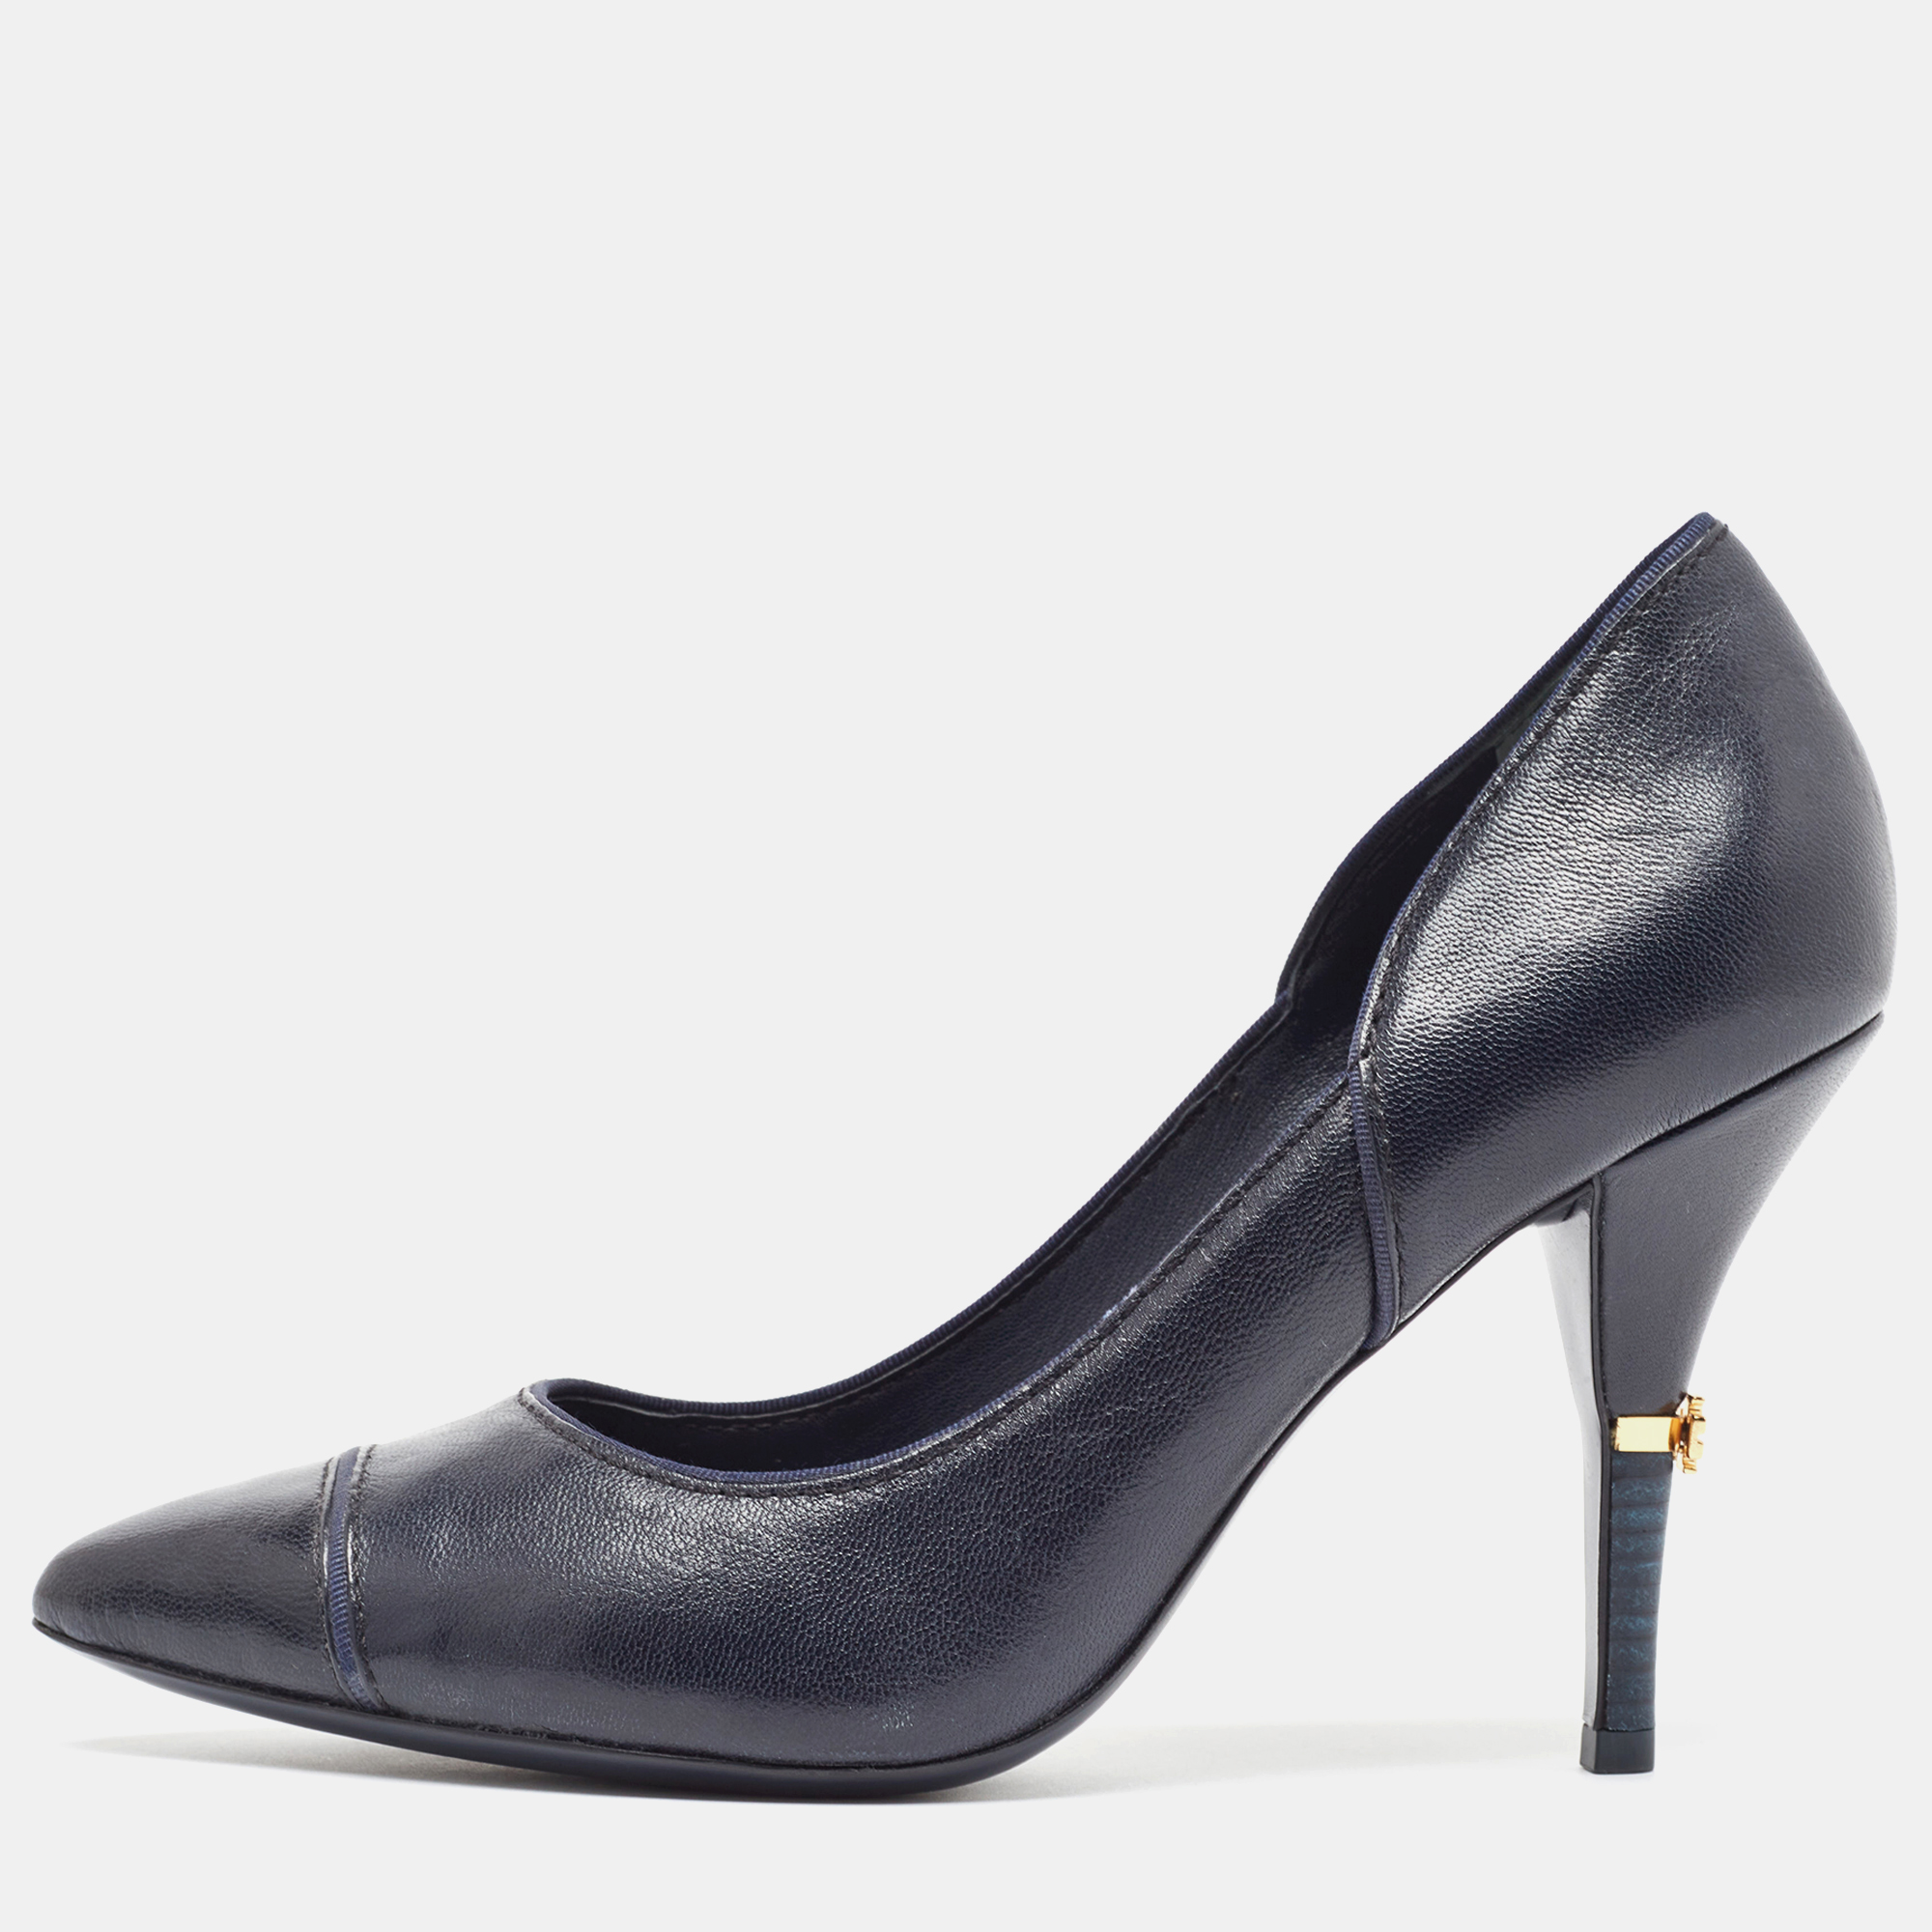 Pre-owned Tory Burch Navy Blue Pointed Toe Pumps Size 40.5